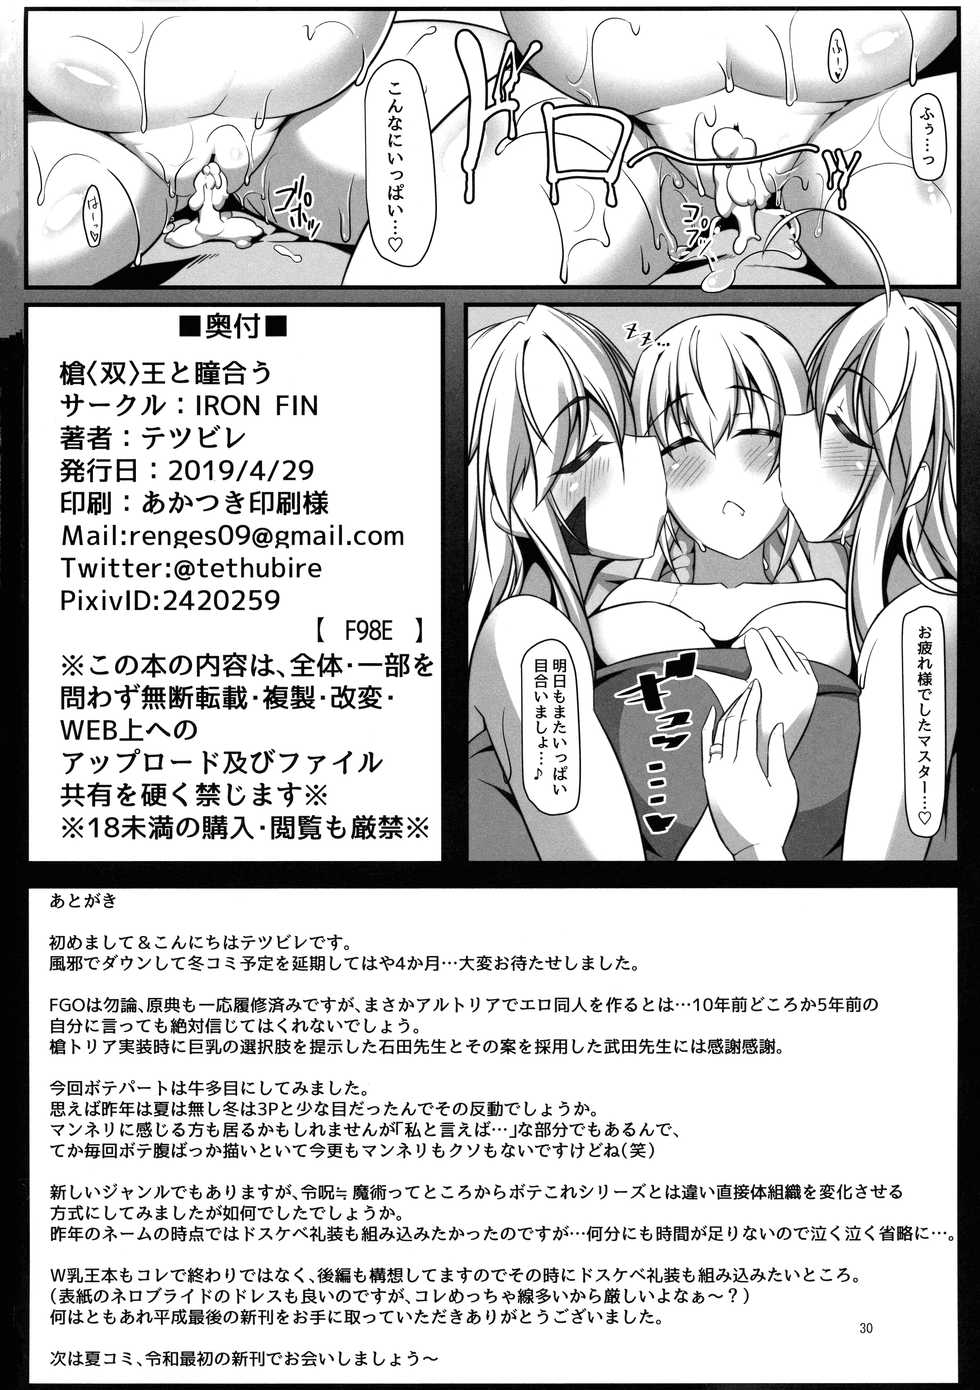 (COMIC1☆15) [IRON FIN (Tethubire)] Souou to Maguau (Fate/Grand Order) - Page 28